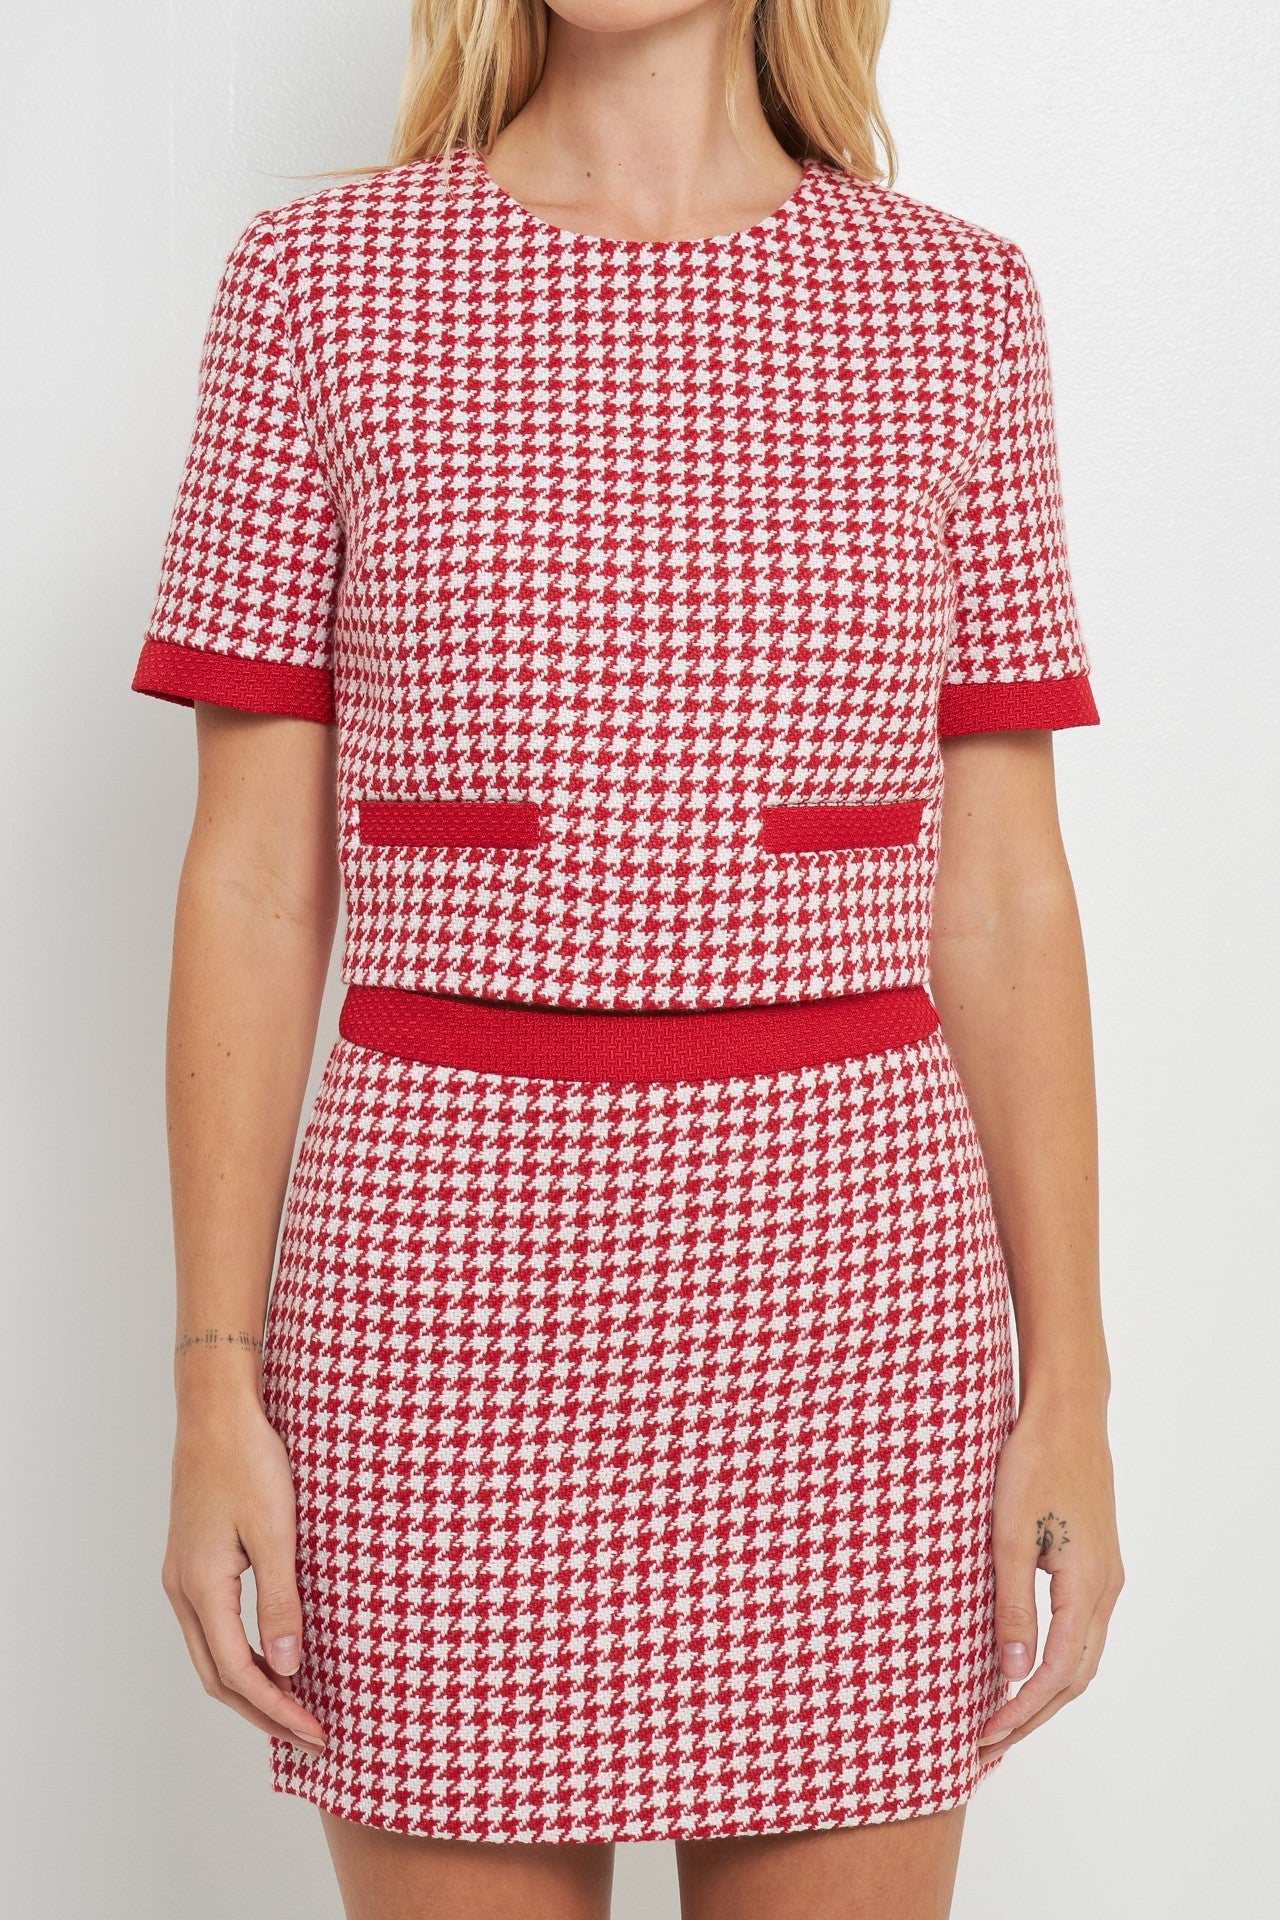 Model Wearing Scarlett Houndstooth Tweed Top in Red and White